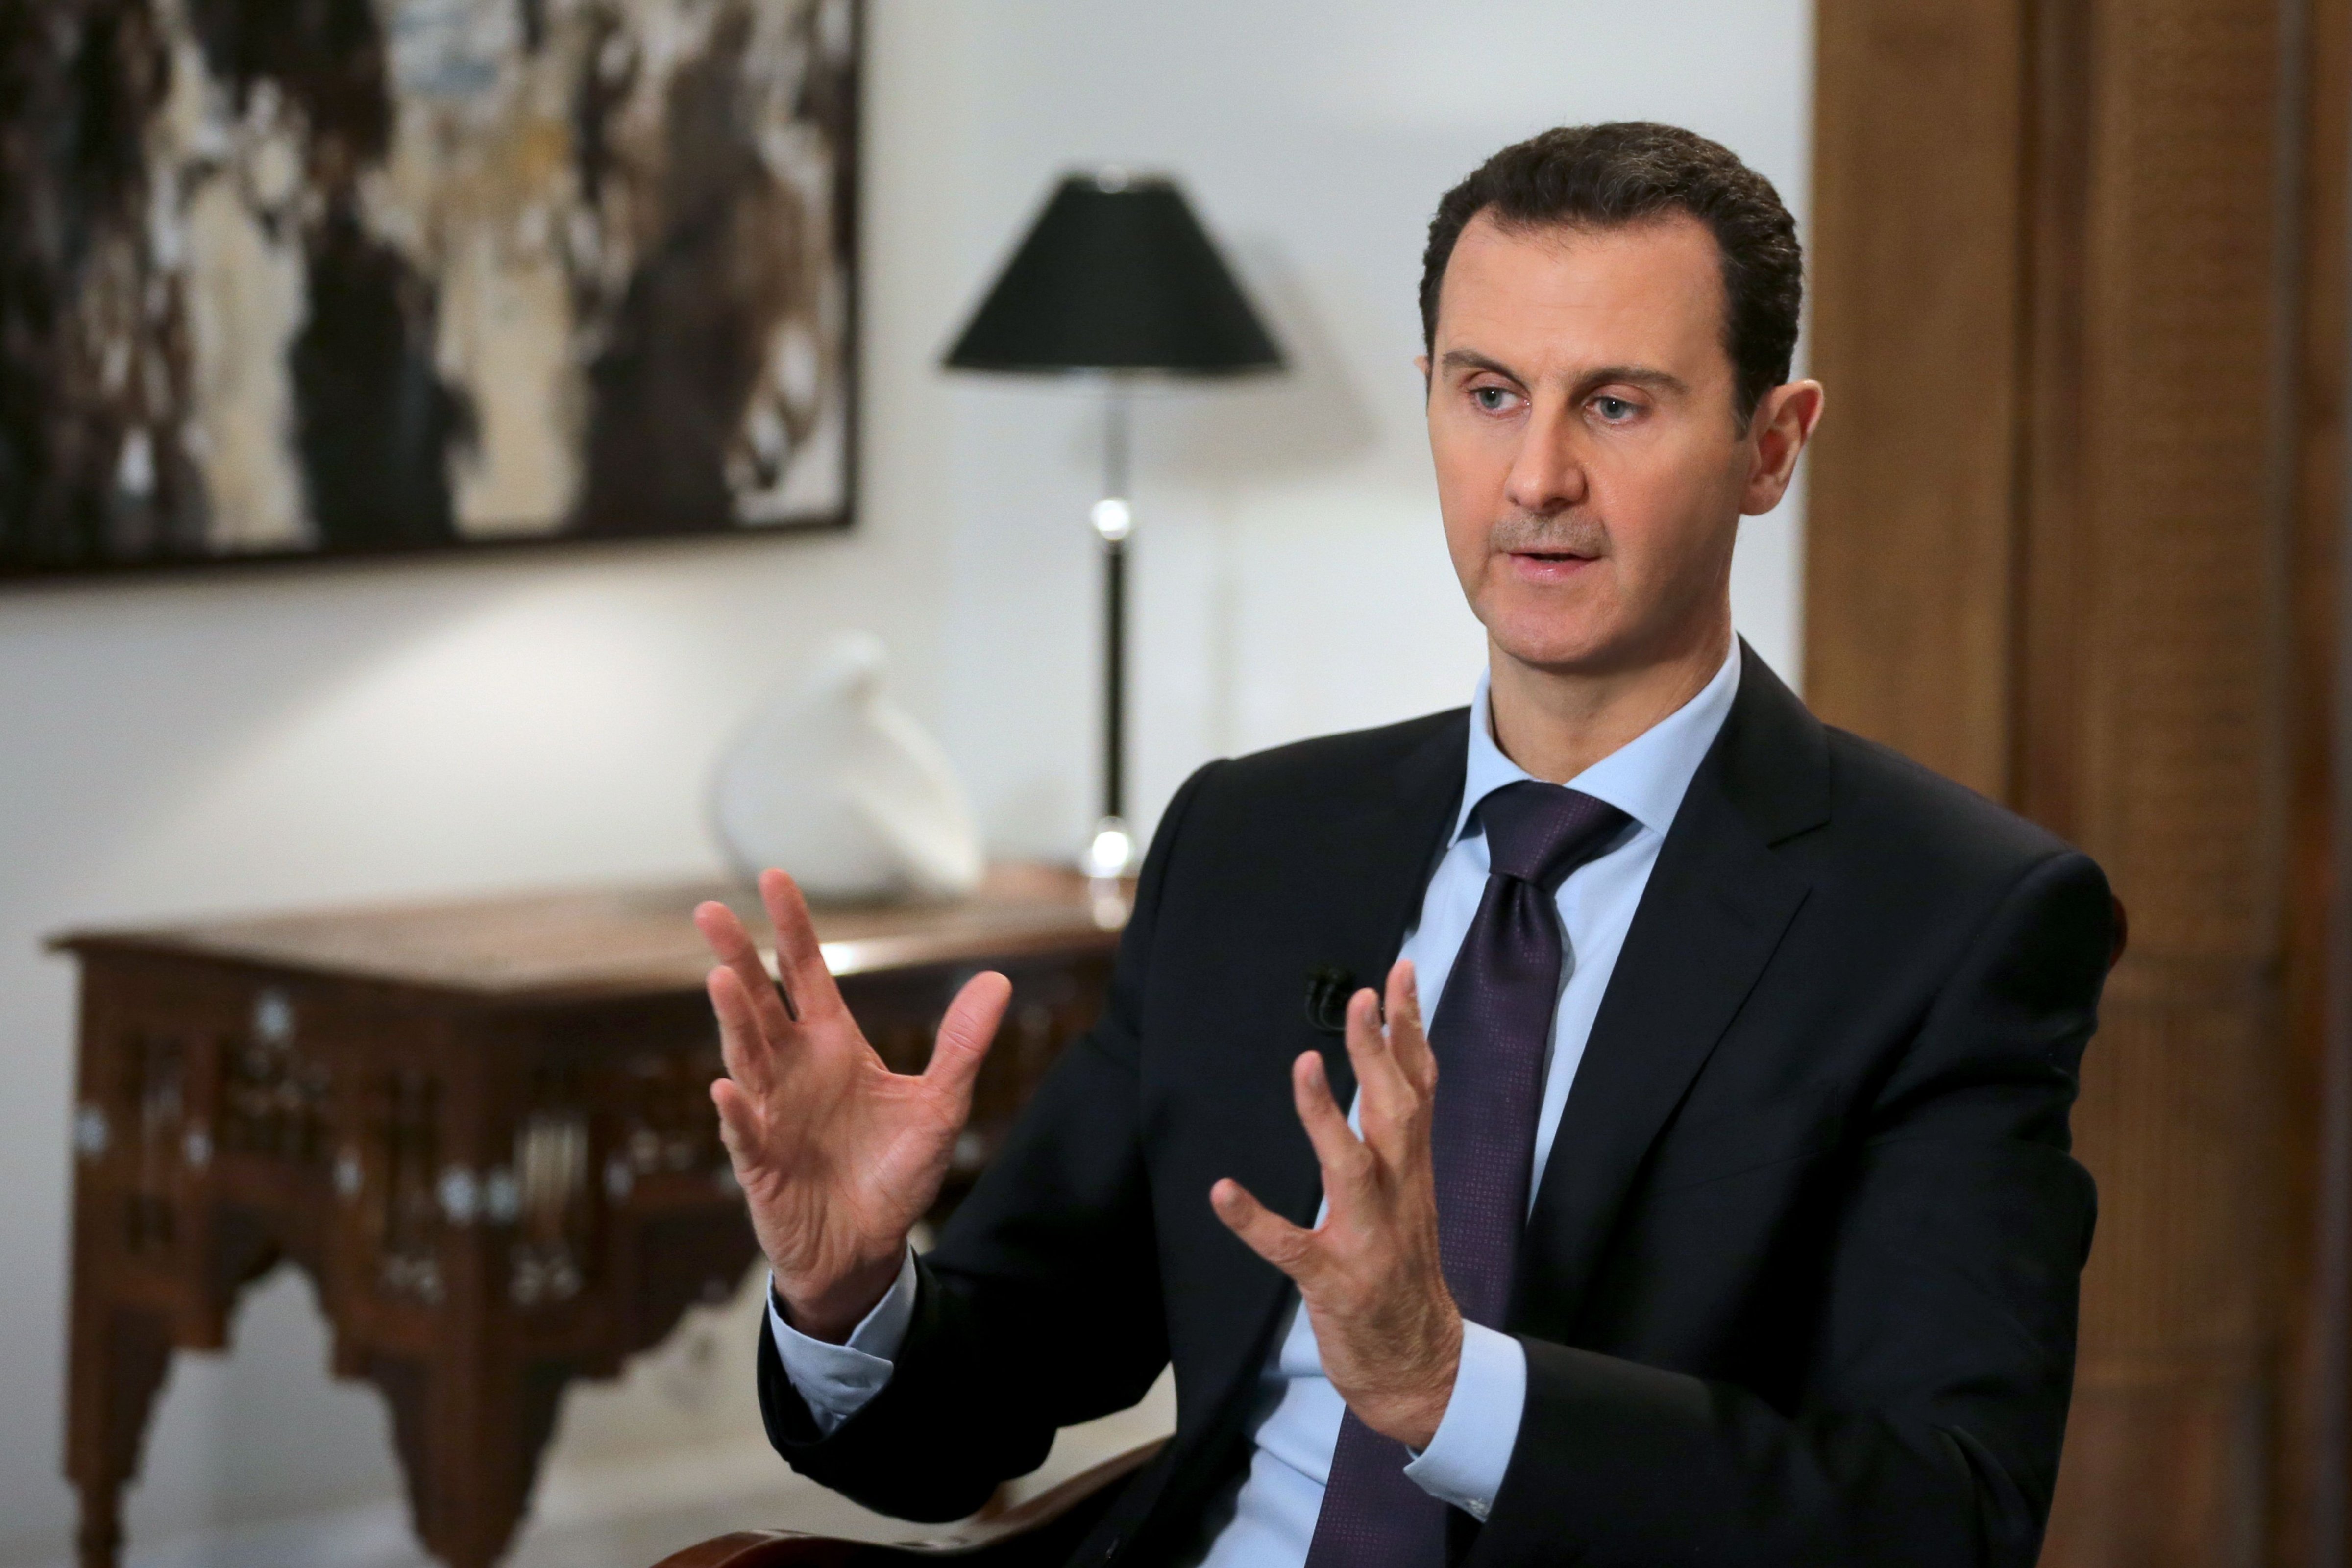 Syrian President Bashar al-Assad gestures during an exclusive interview with AFP in the capital Damascus on Feb. 11, 2016. (Joseph Eid—AFP/Getty Images)